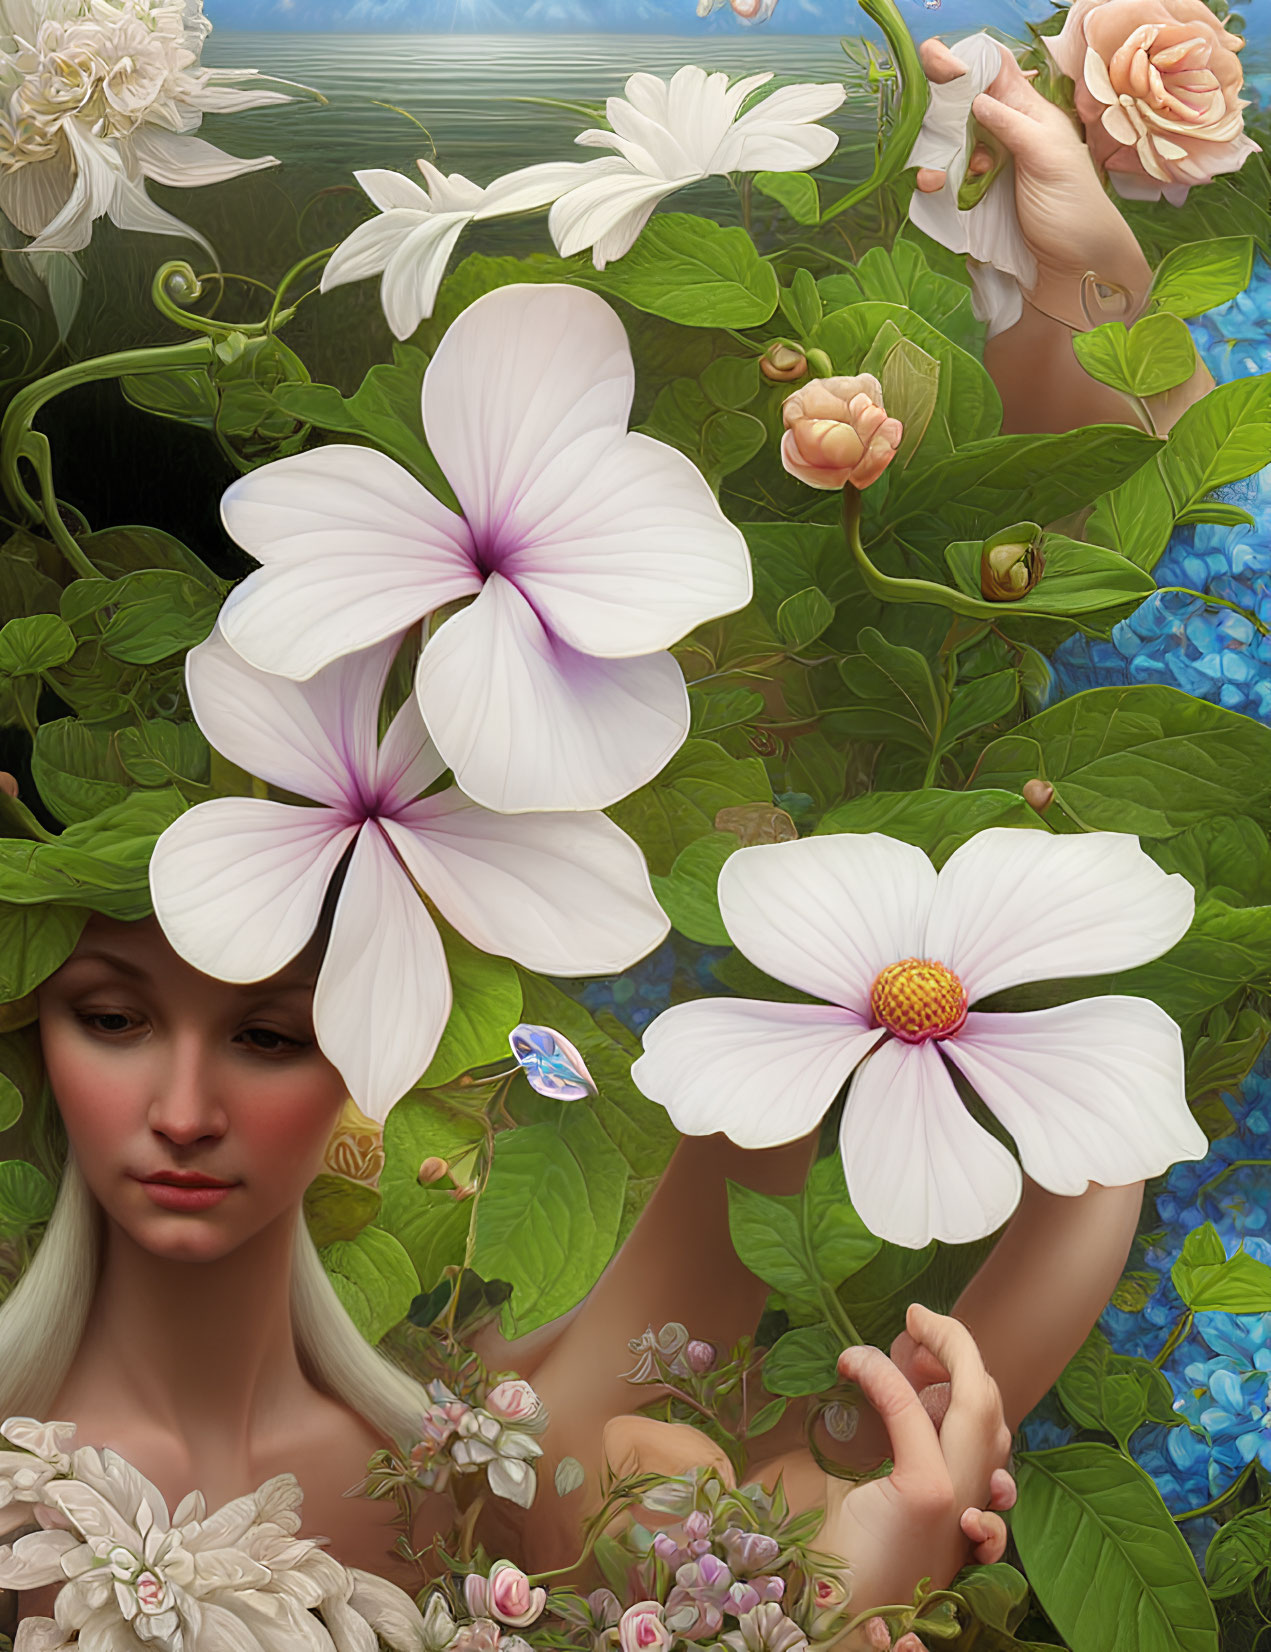 Surreal portrait of serene woman with oversized flowers